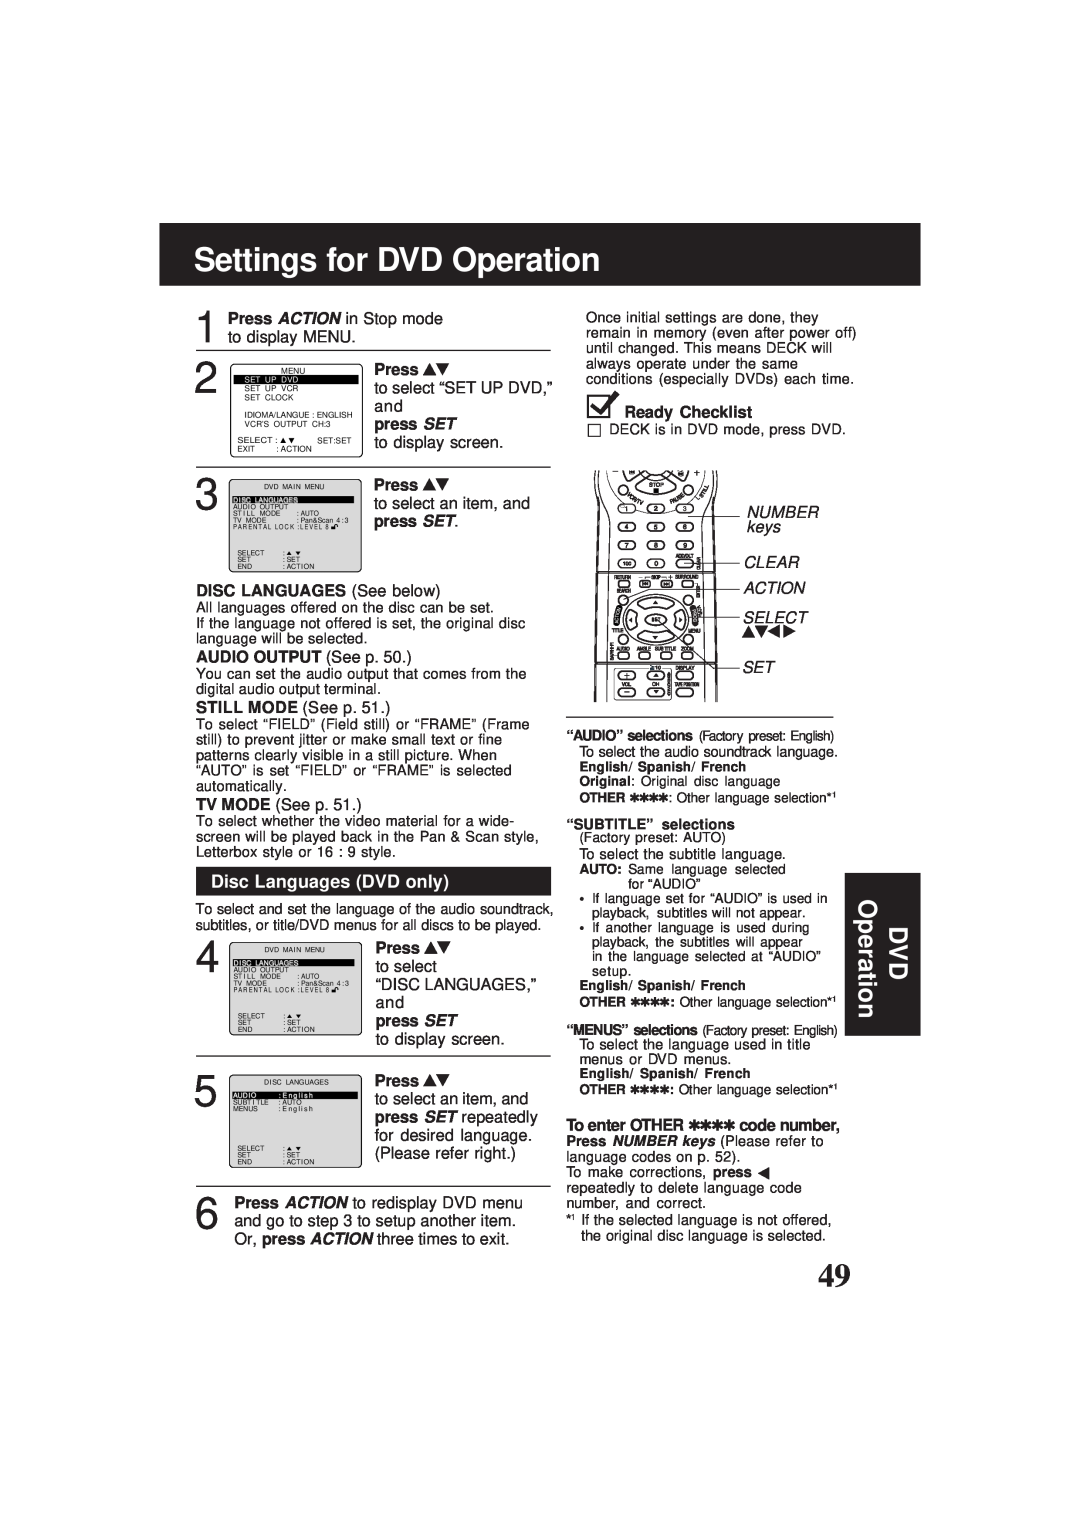 Panasonic PV-D4761 Settings for DVD Operation, Disc Languages DVD only, Press, press SET, DISC LANGUAGES See below 